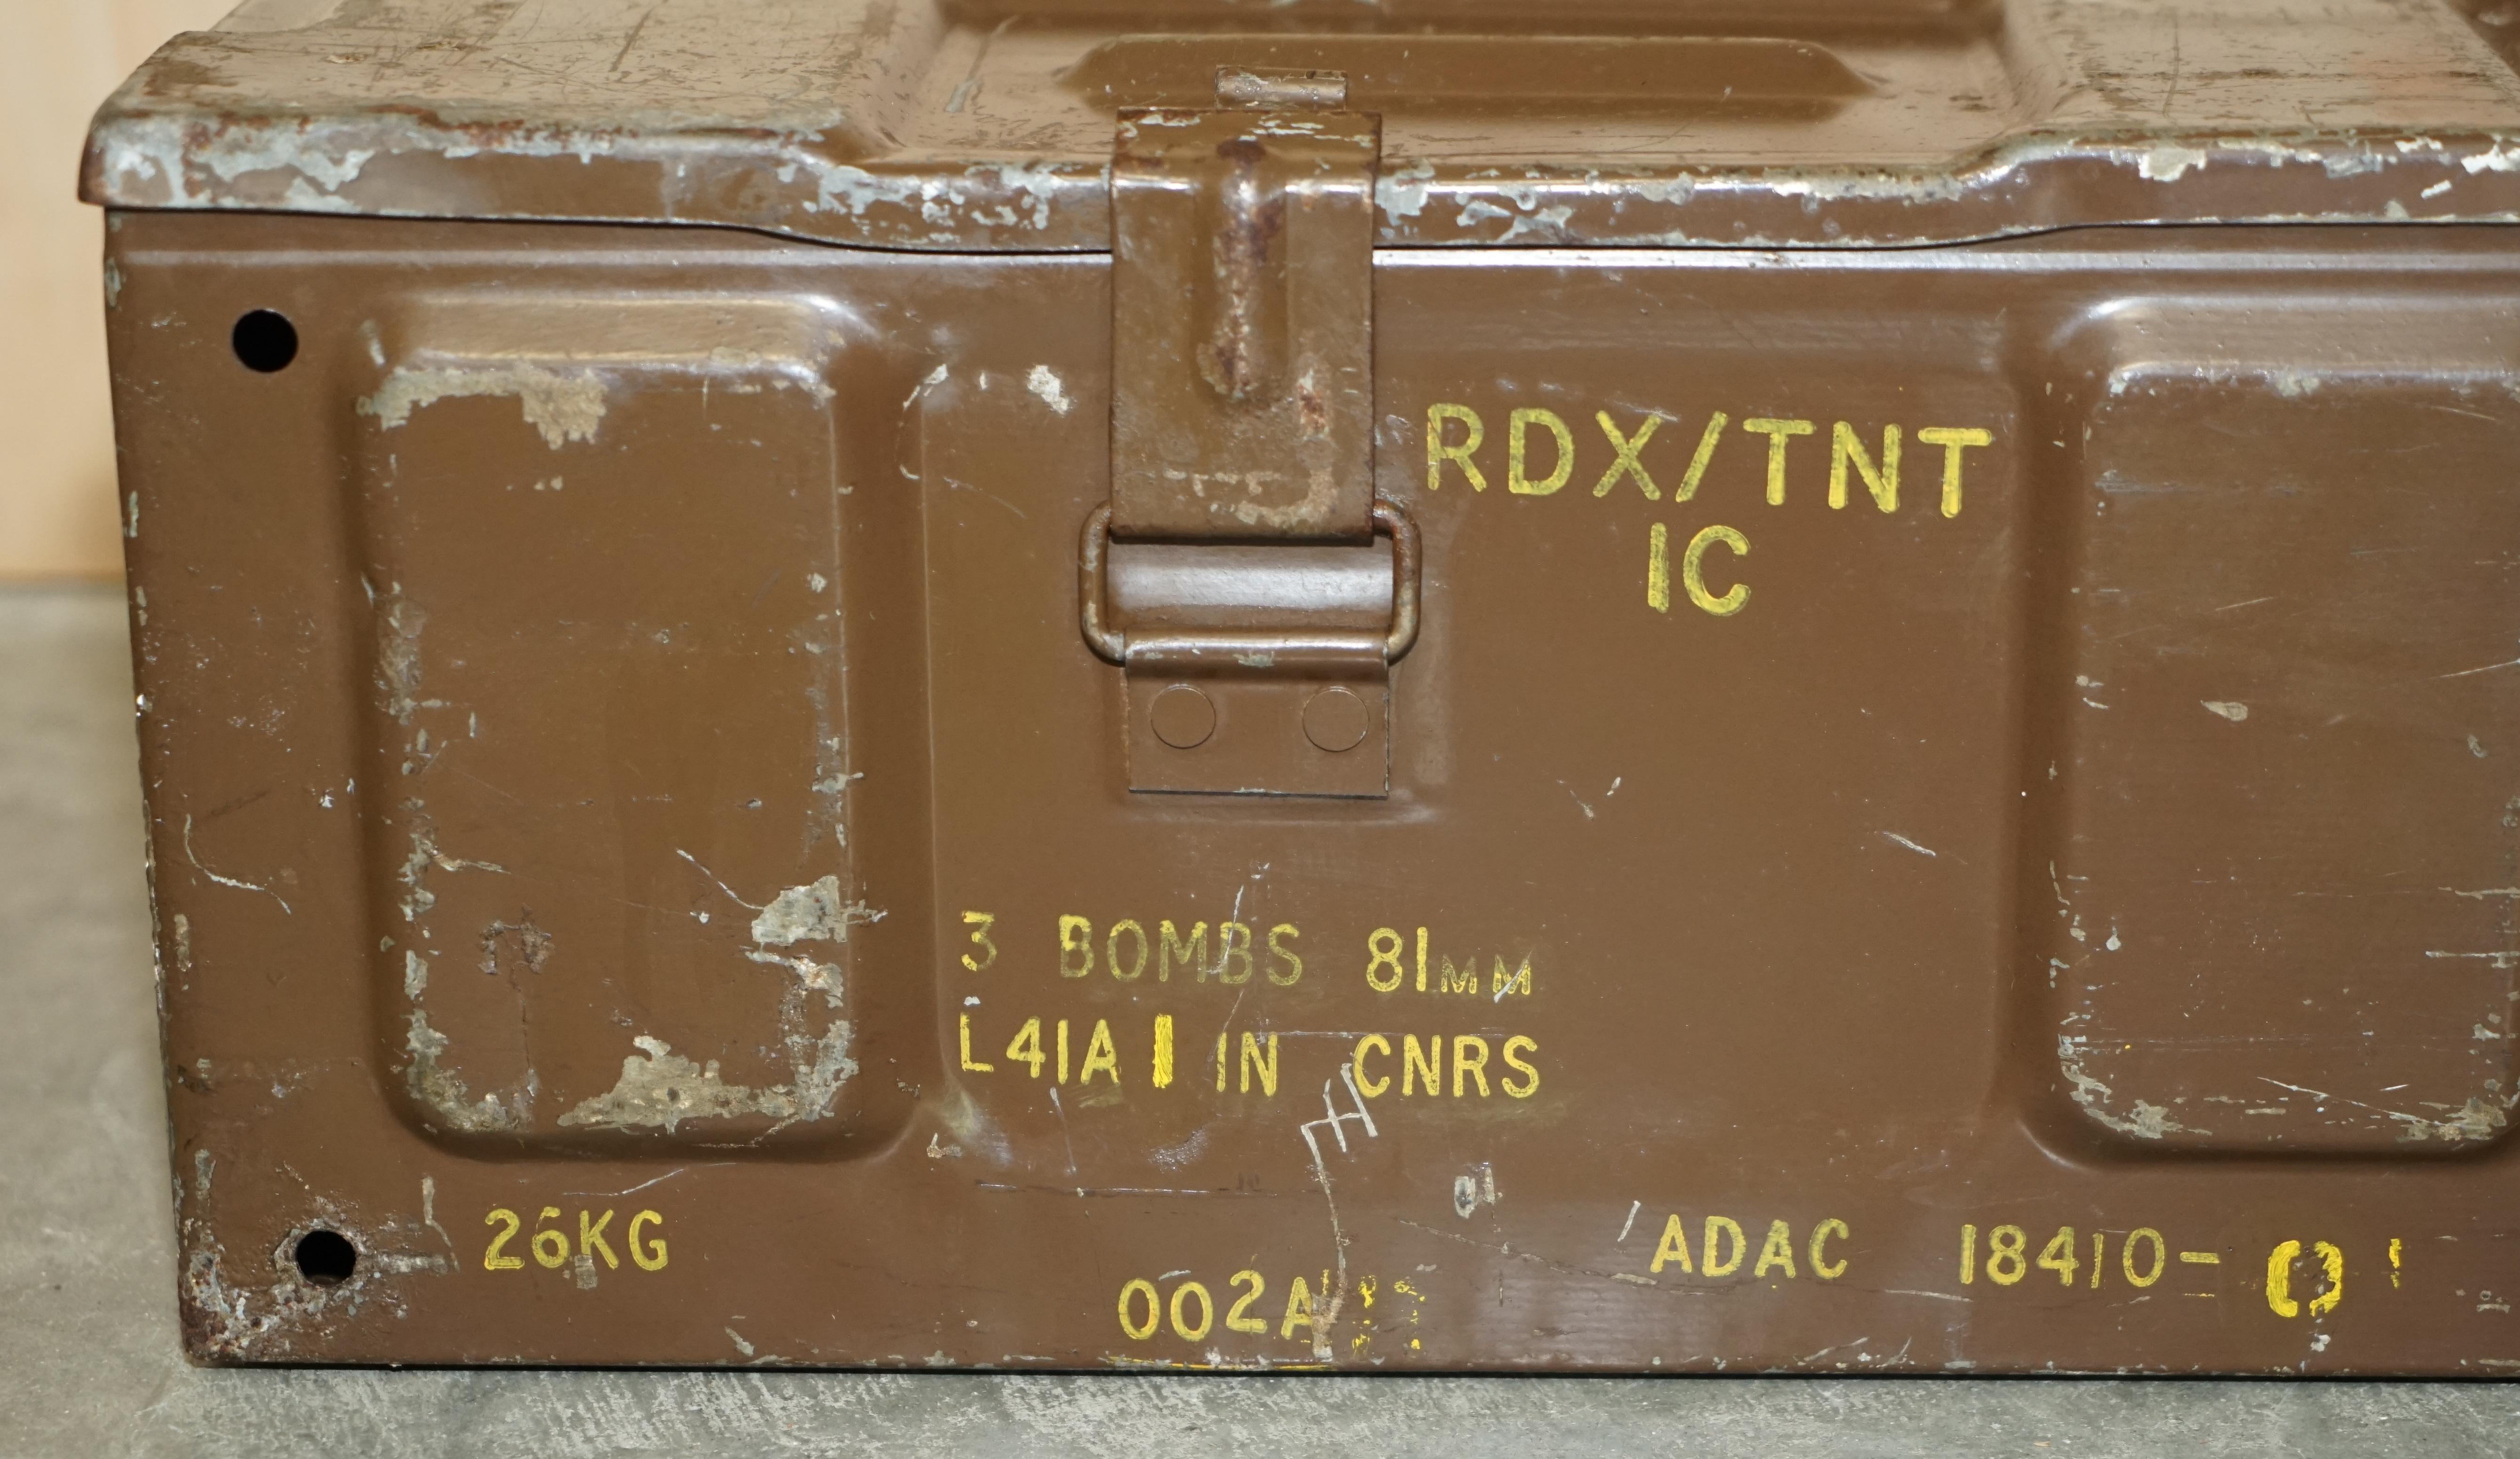 European Vintage Gulf War Military Campaign Used Ammunition Bomb Box Period Patiia For Sale